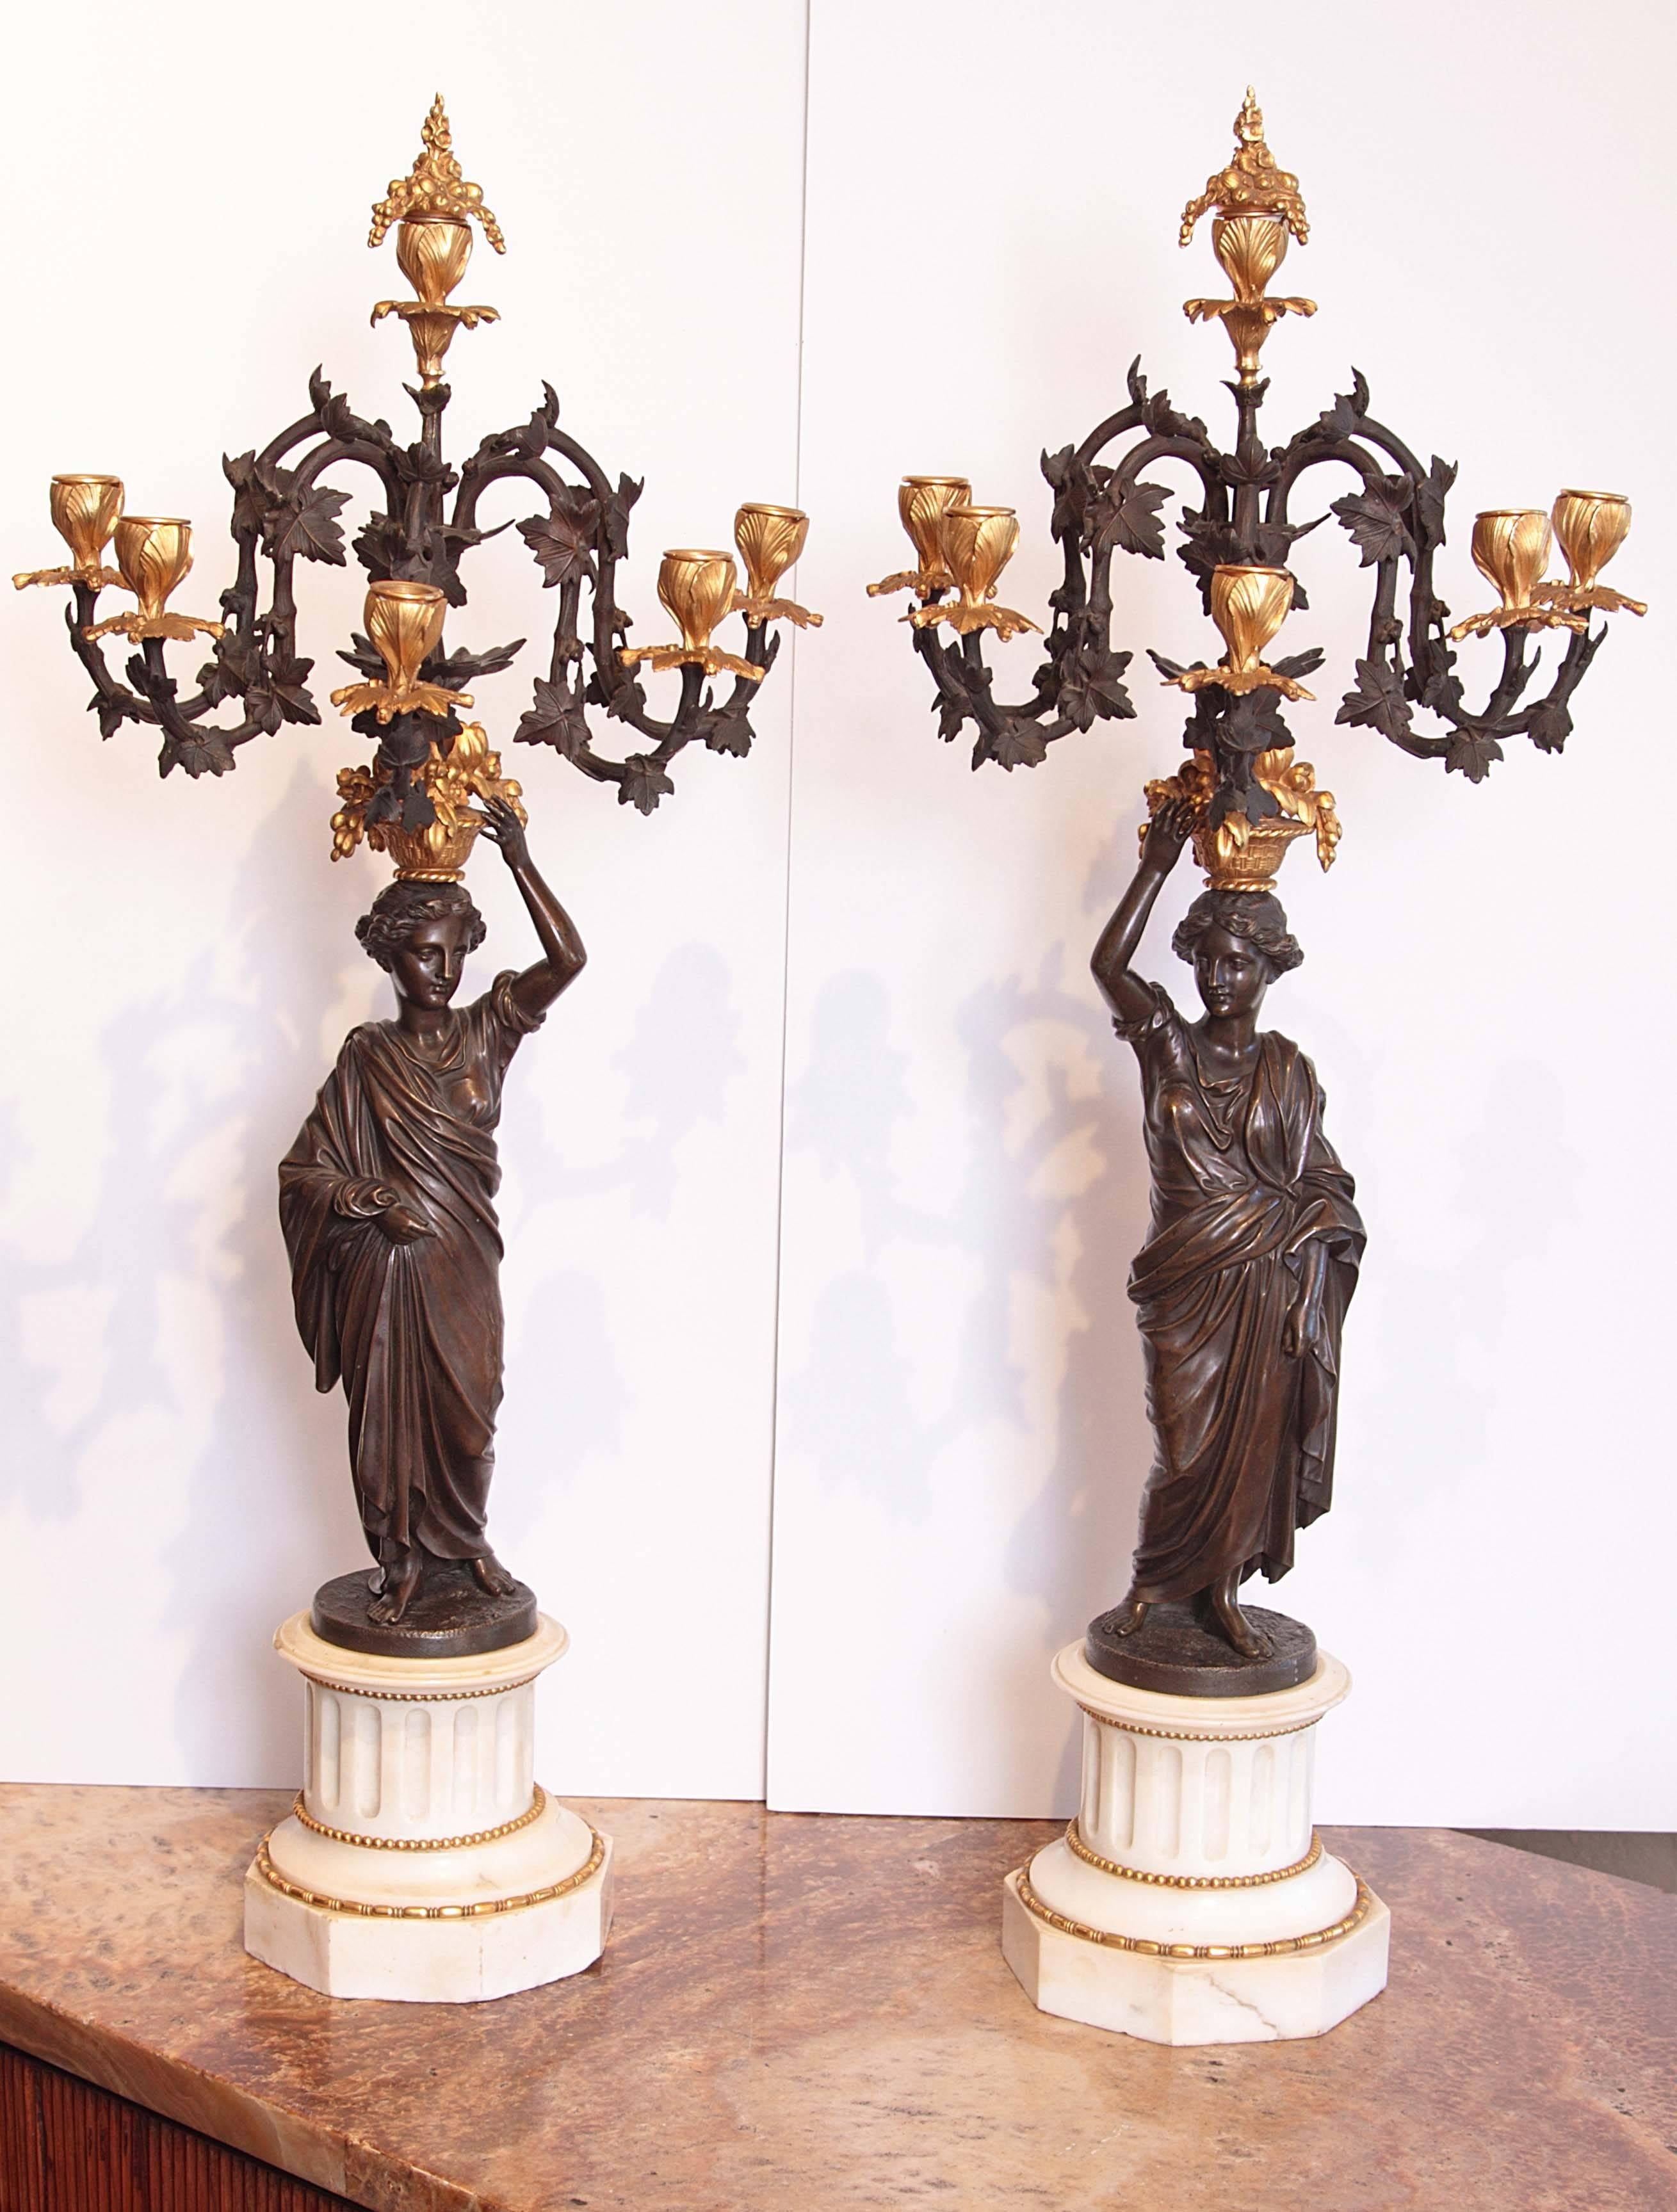 Pair of 19th century French Louis XV gilt bronze and patina. Carrara marble bases signed F Barbedienne.